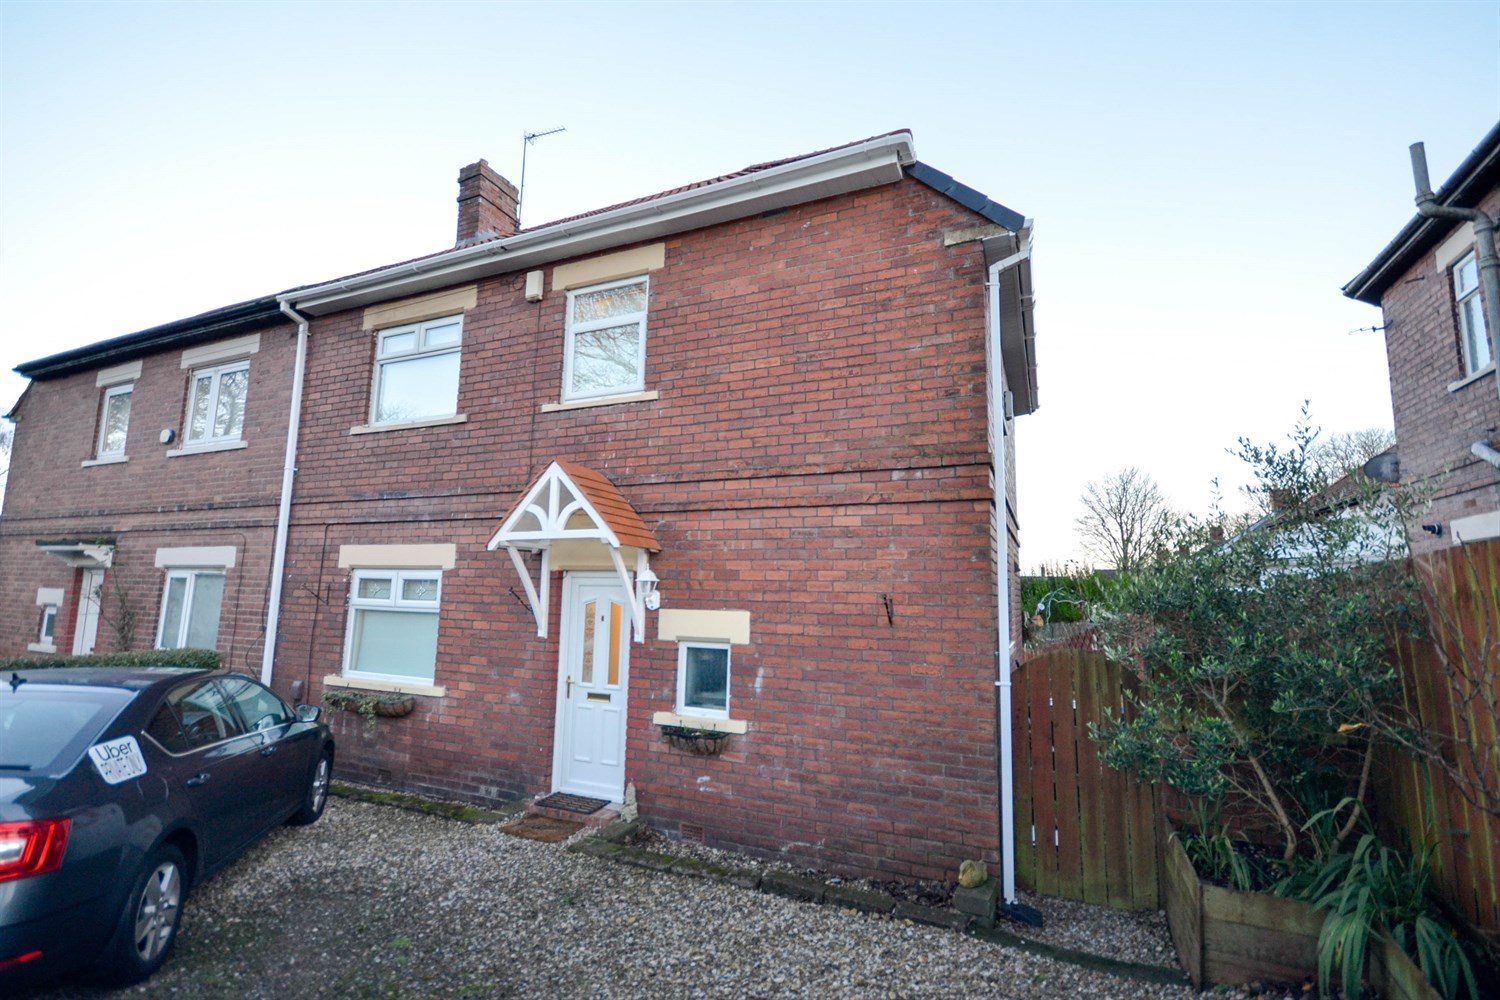 2 bed semi-detached house for sale in Gainsborough Crescent, Gateshead - Property Image 1